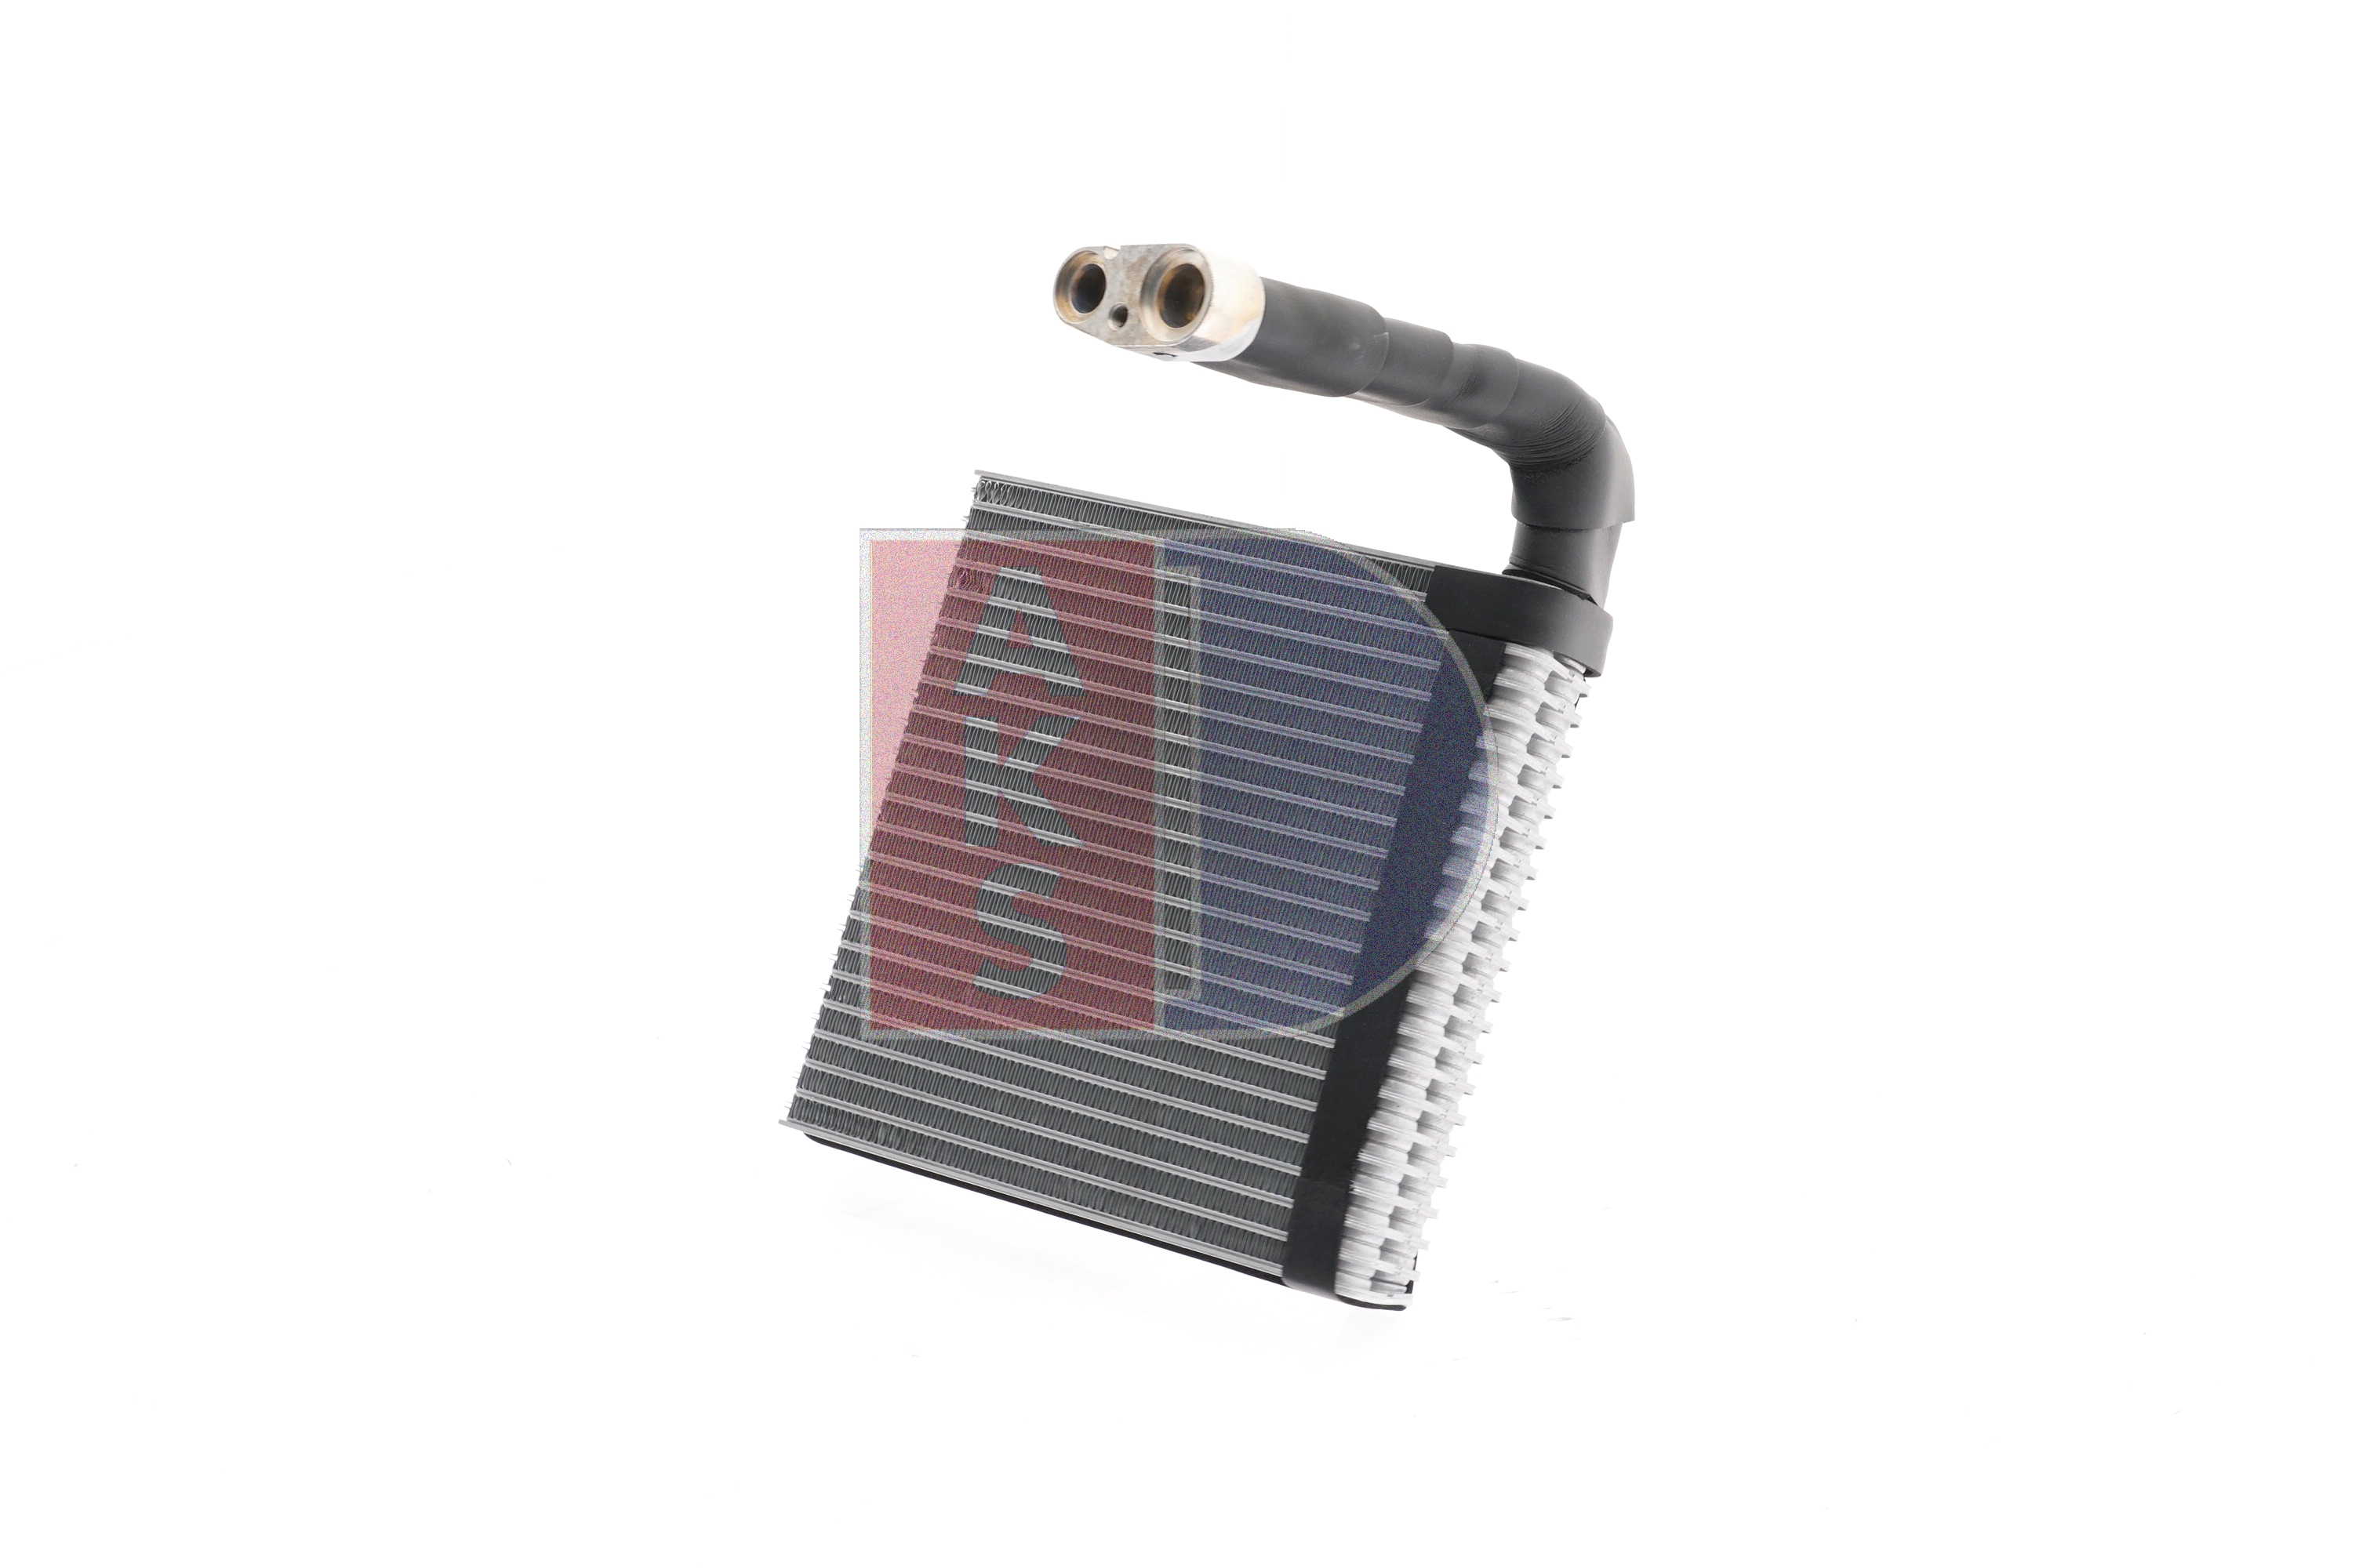 Volvo Air conditioning evaporator AKS DASIS 820359N at a good price